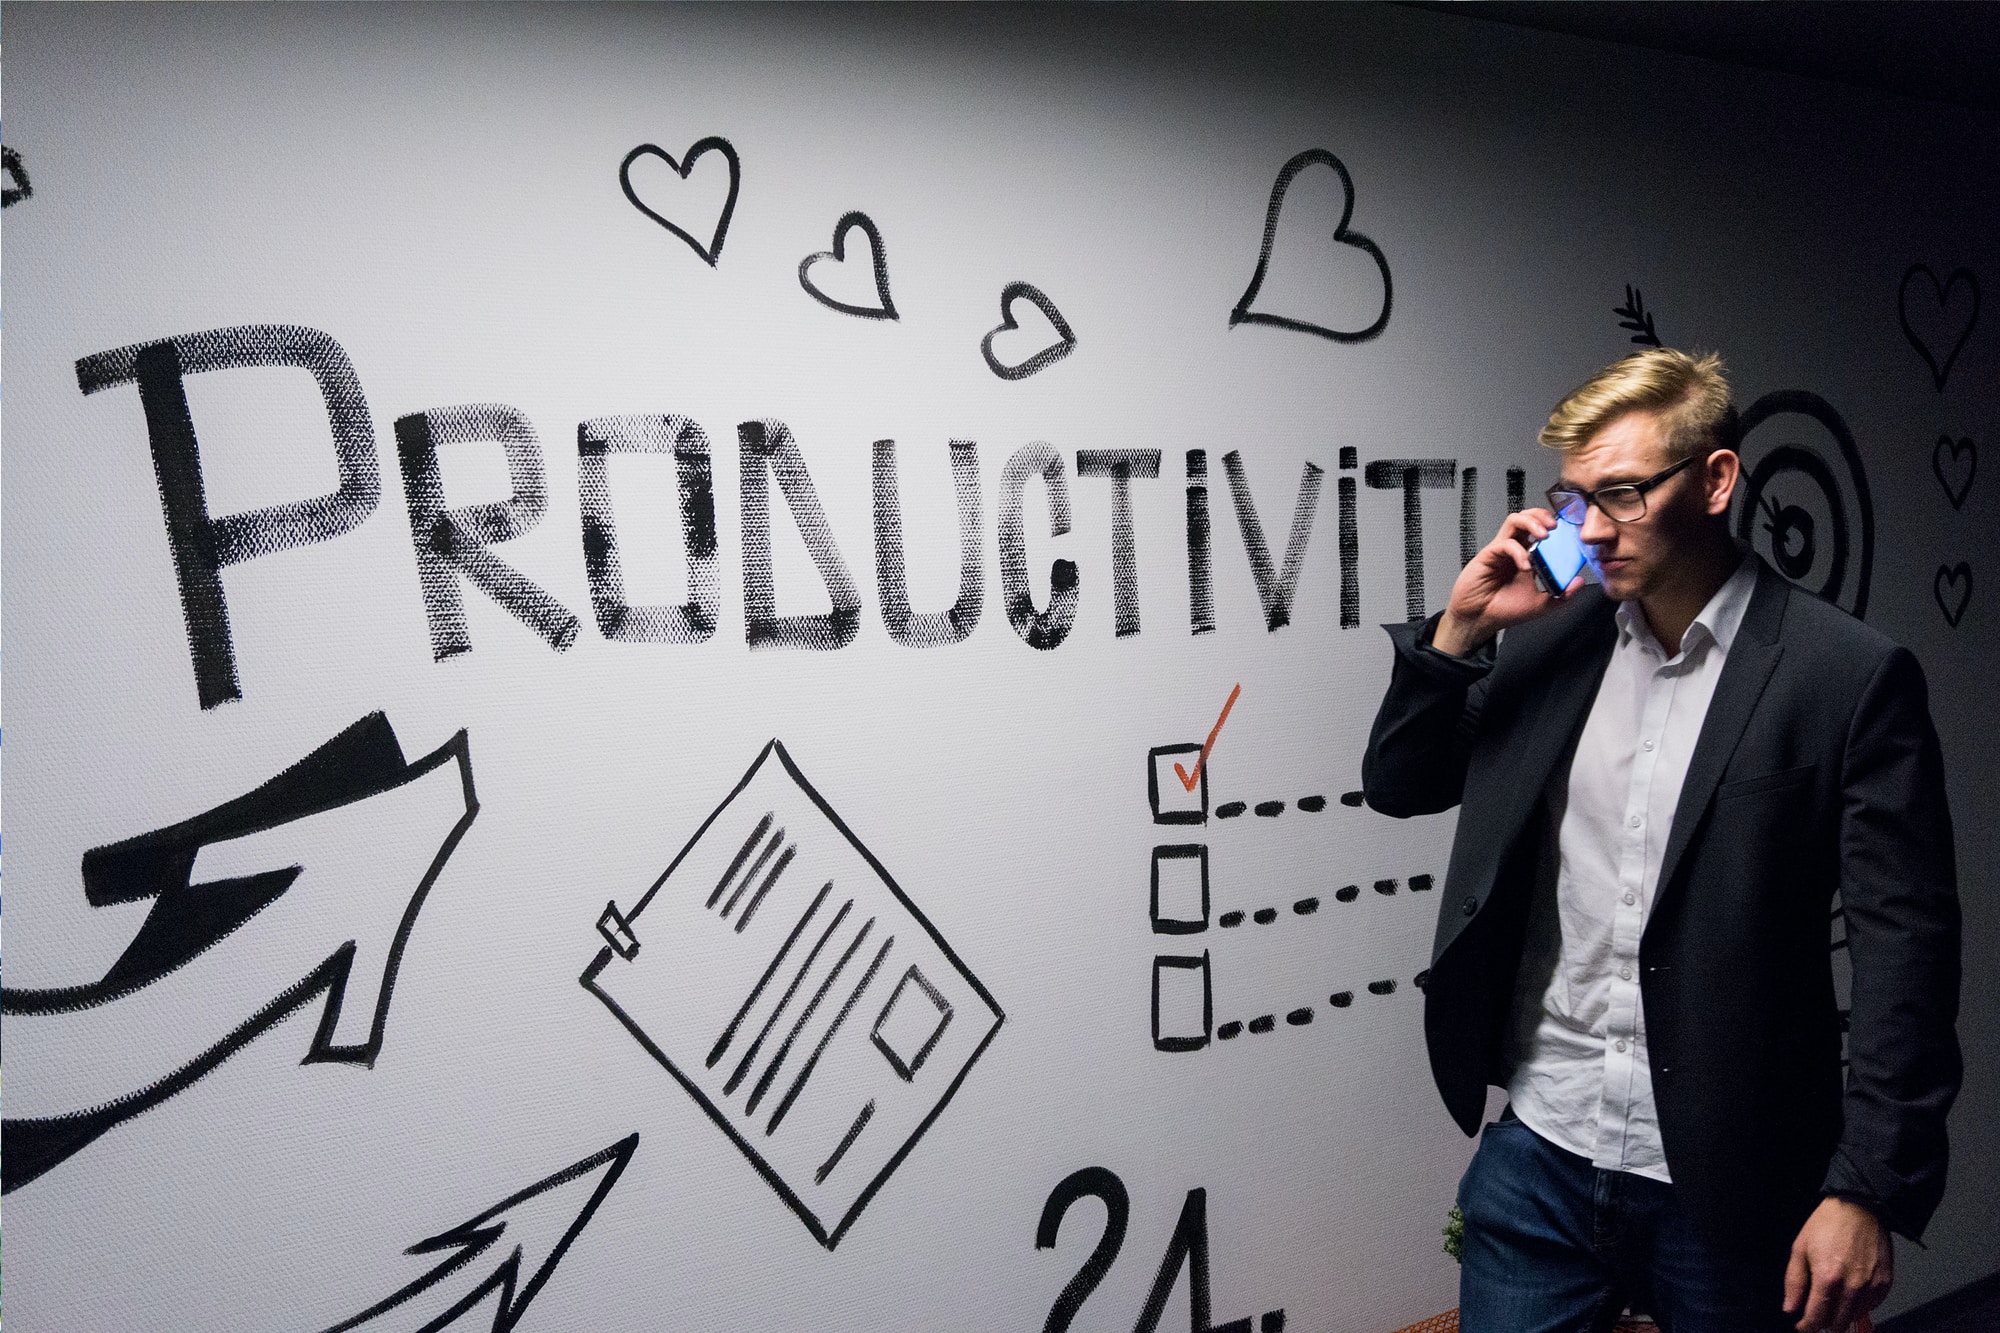 Picture of man in suit drinking something standing in front of a whiteboard with the word "productivity" written on it. 